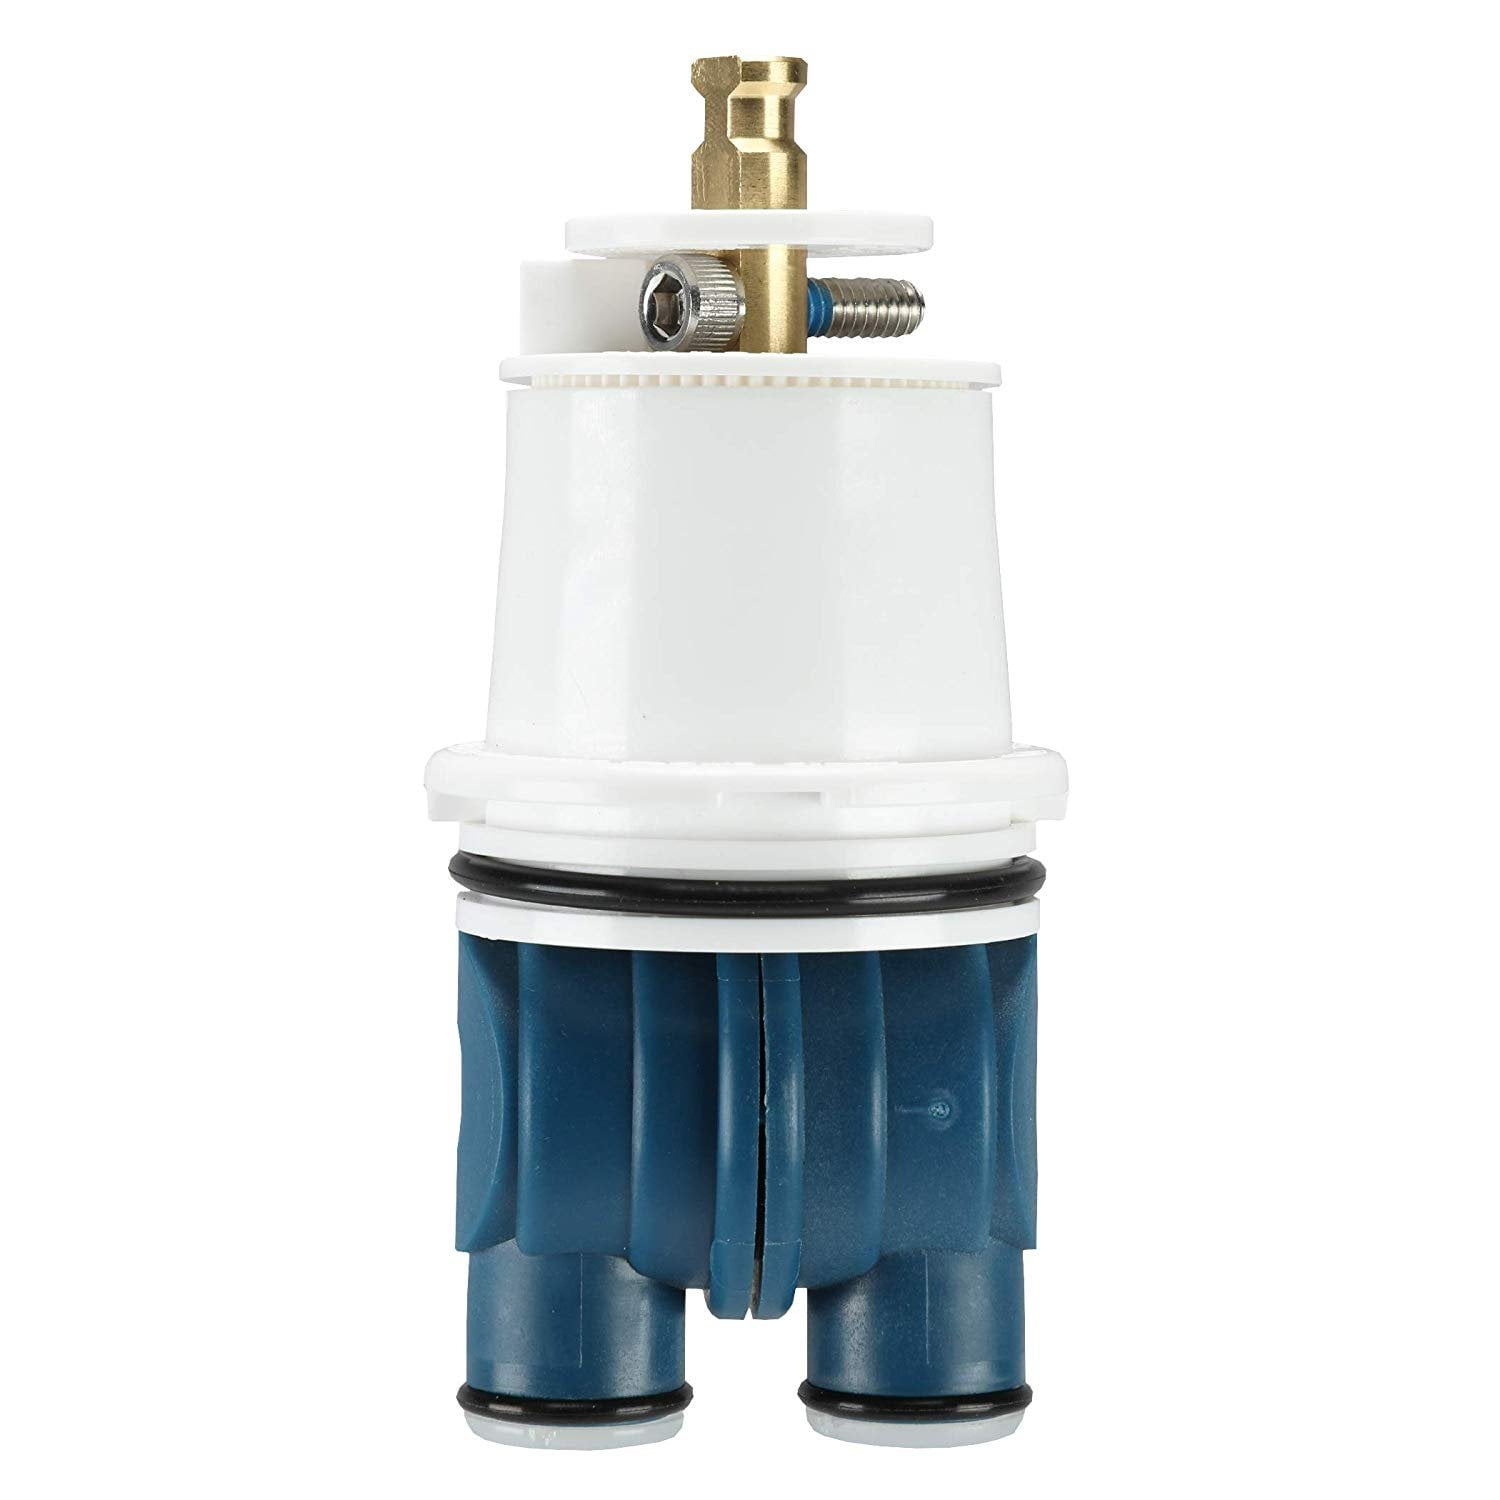 Delta Monitor Shower Valve Cartridge, How To Replace A Bathtub Faucet Cartridge